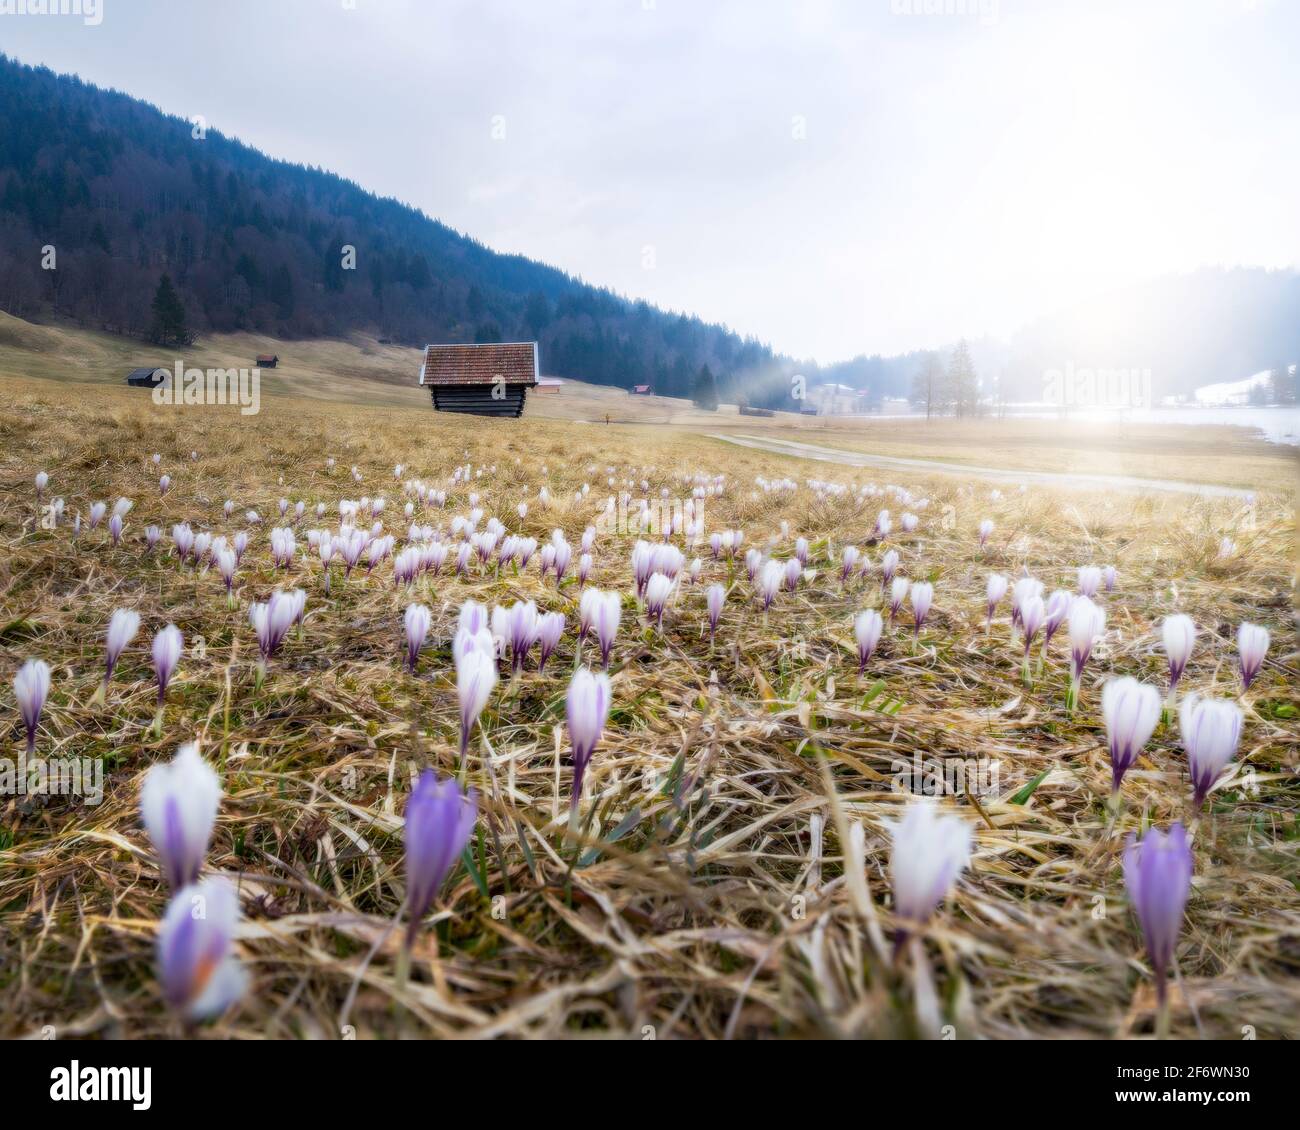 Crocusses blooming on an alpine meadow in Bavaria, Germany Stock Photo